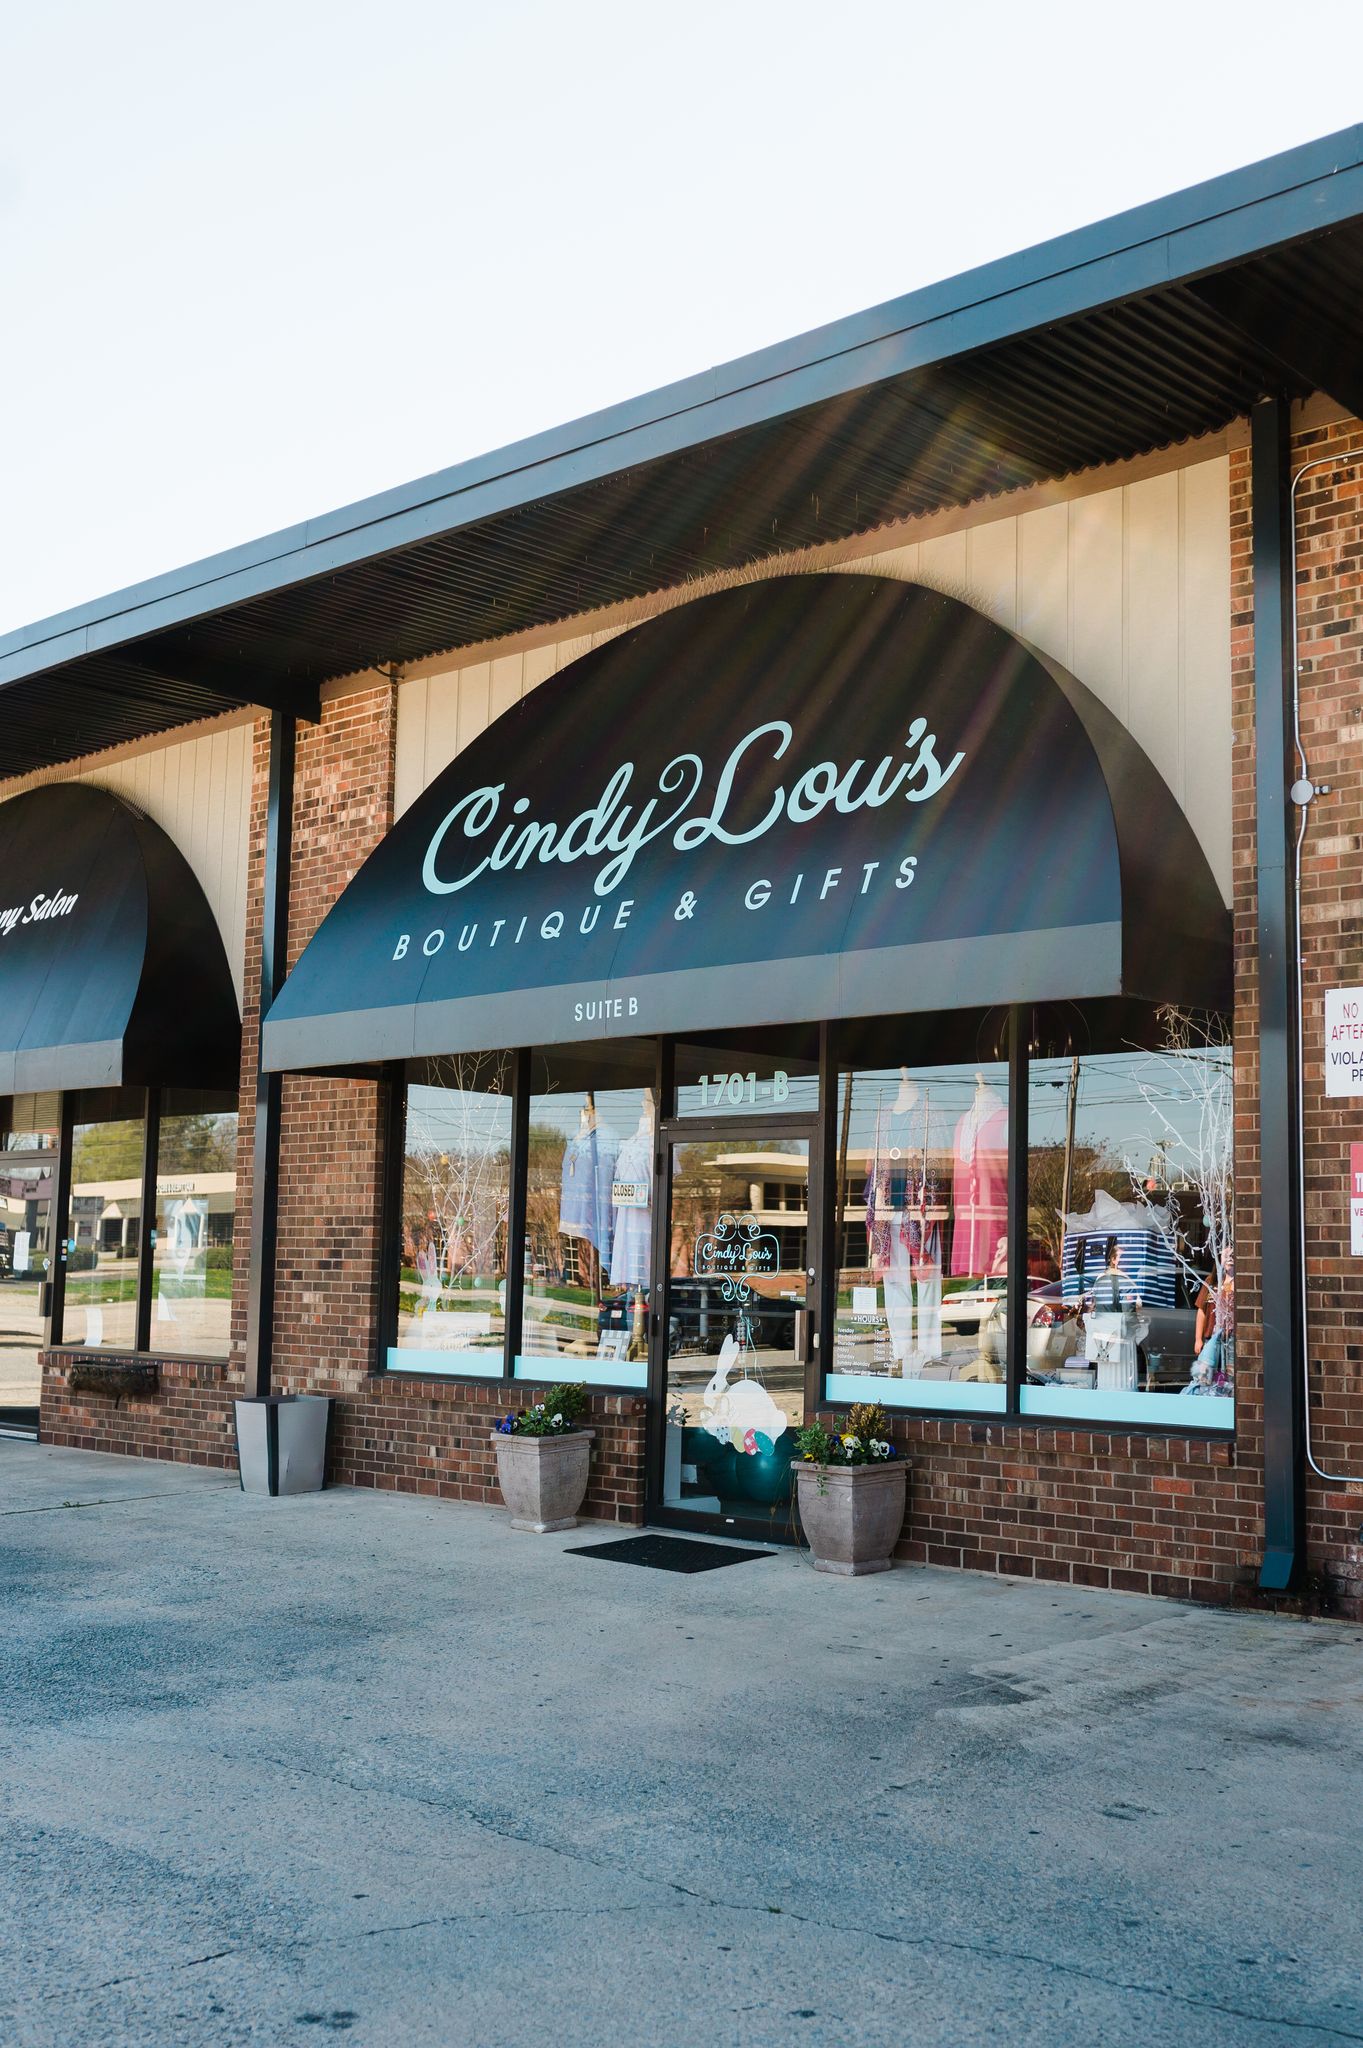 The storefront at Cindy Lou's boutique in High Point, NC.